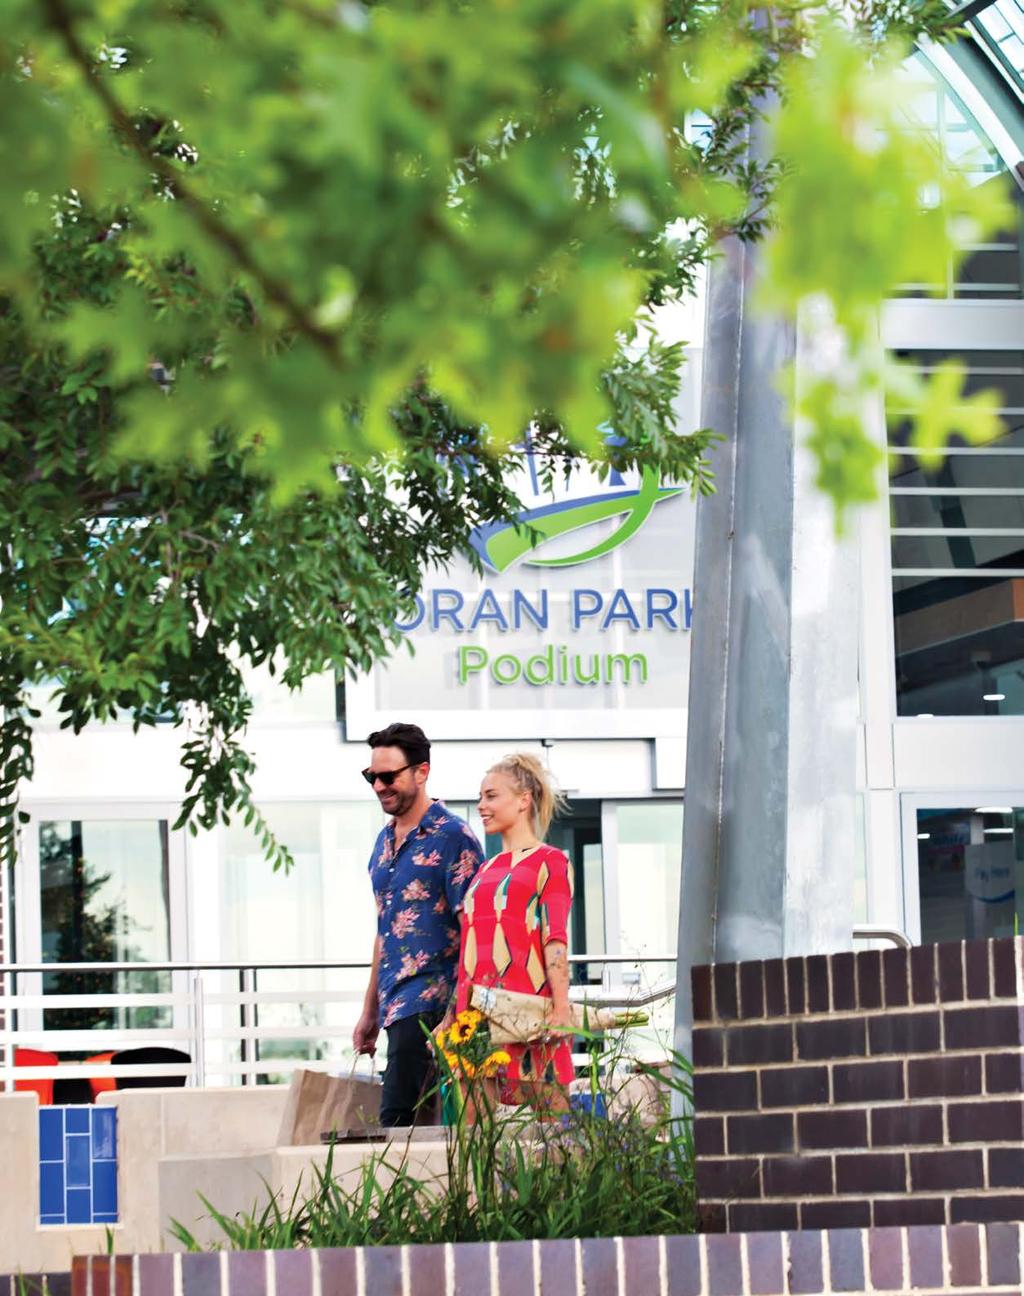 Just under a 1km walk to Oran Park Town Centre Oran Park Podium Shopping Centre - 900m Town Library and Leisure Centre - 900m Ride to Oran Park Public